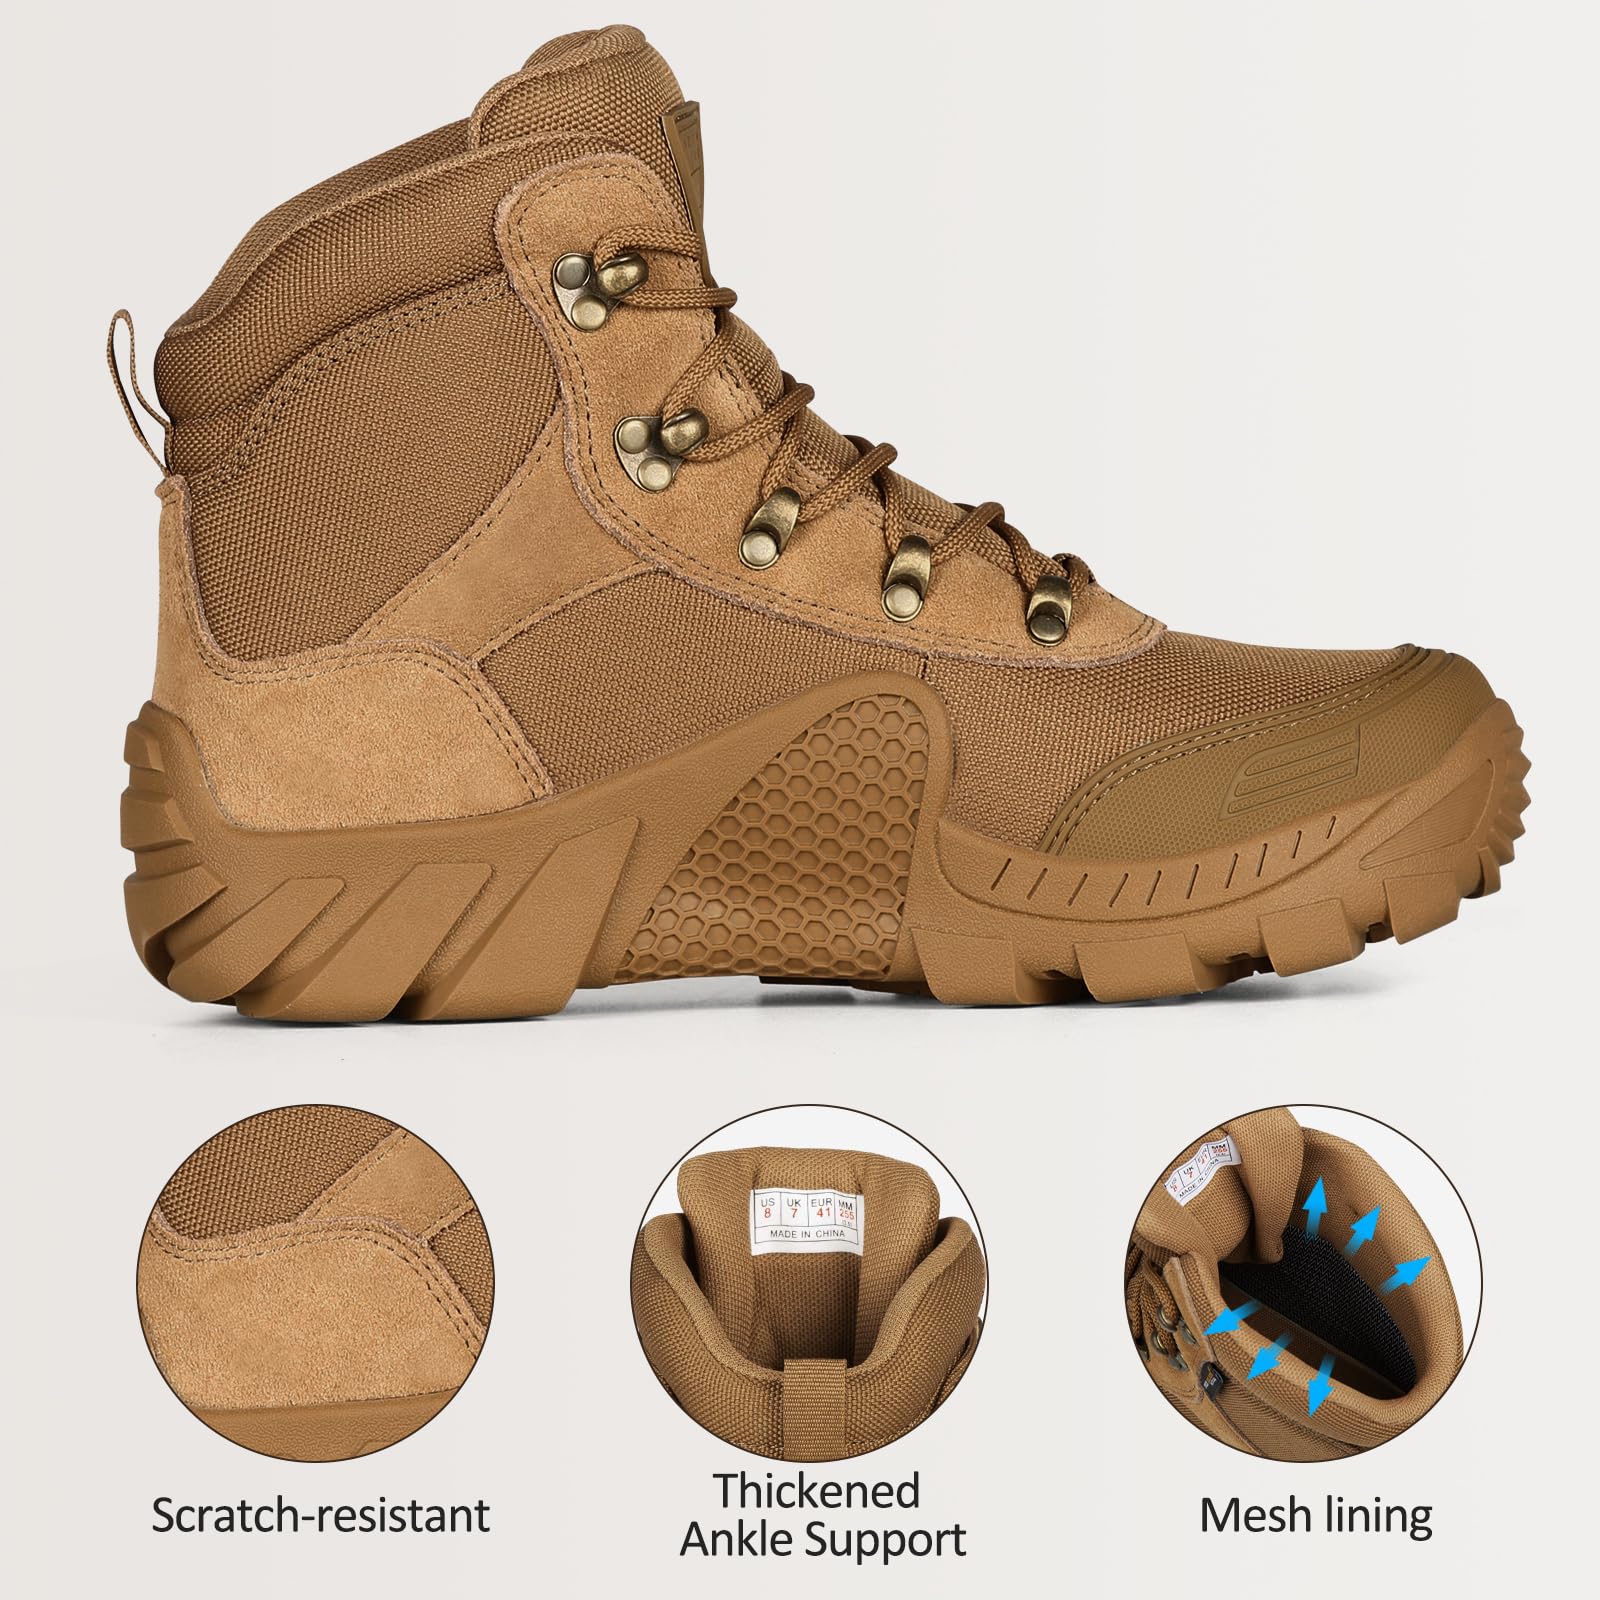 4.6 Inch Waterproof Military Work Boots